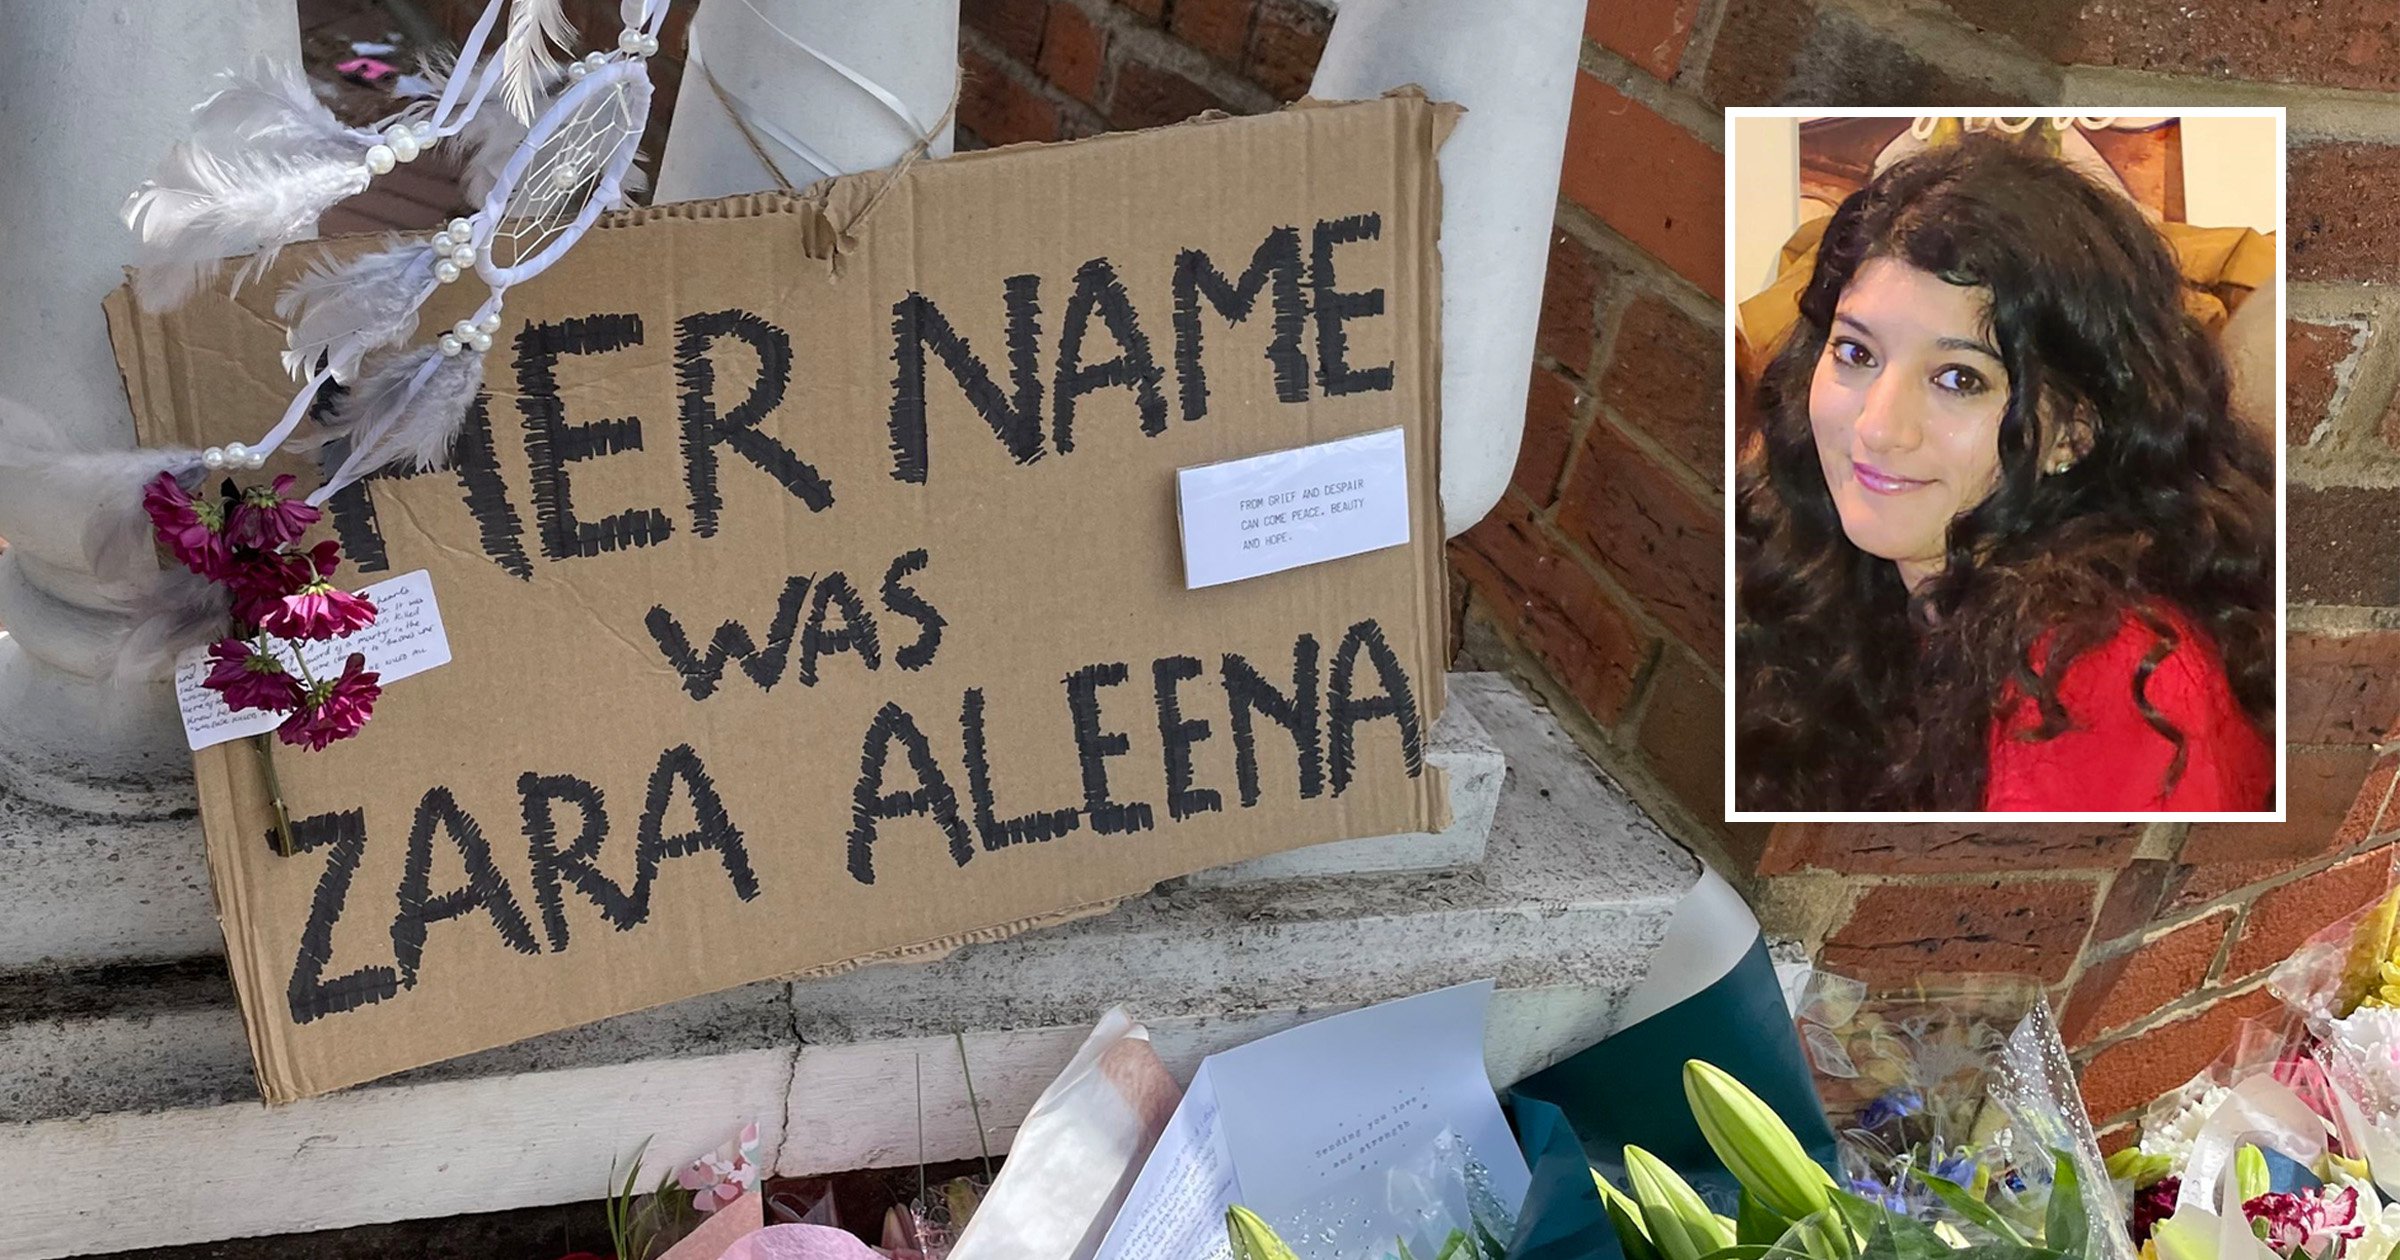 Silent vigil to be held today for Zara Aleena to ‘walk her home’